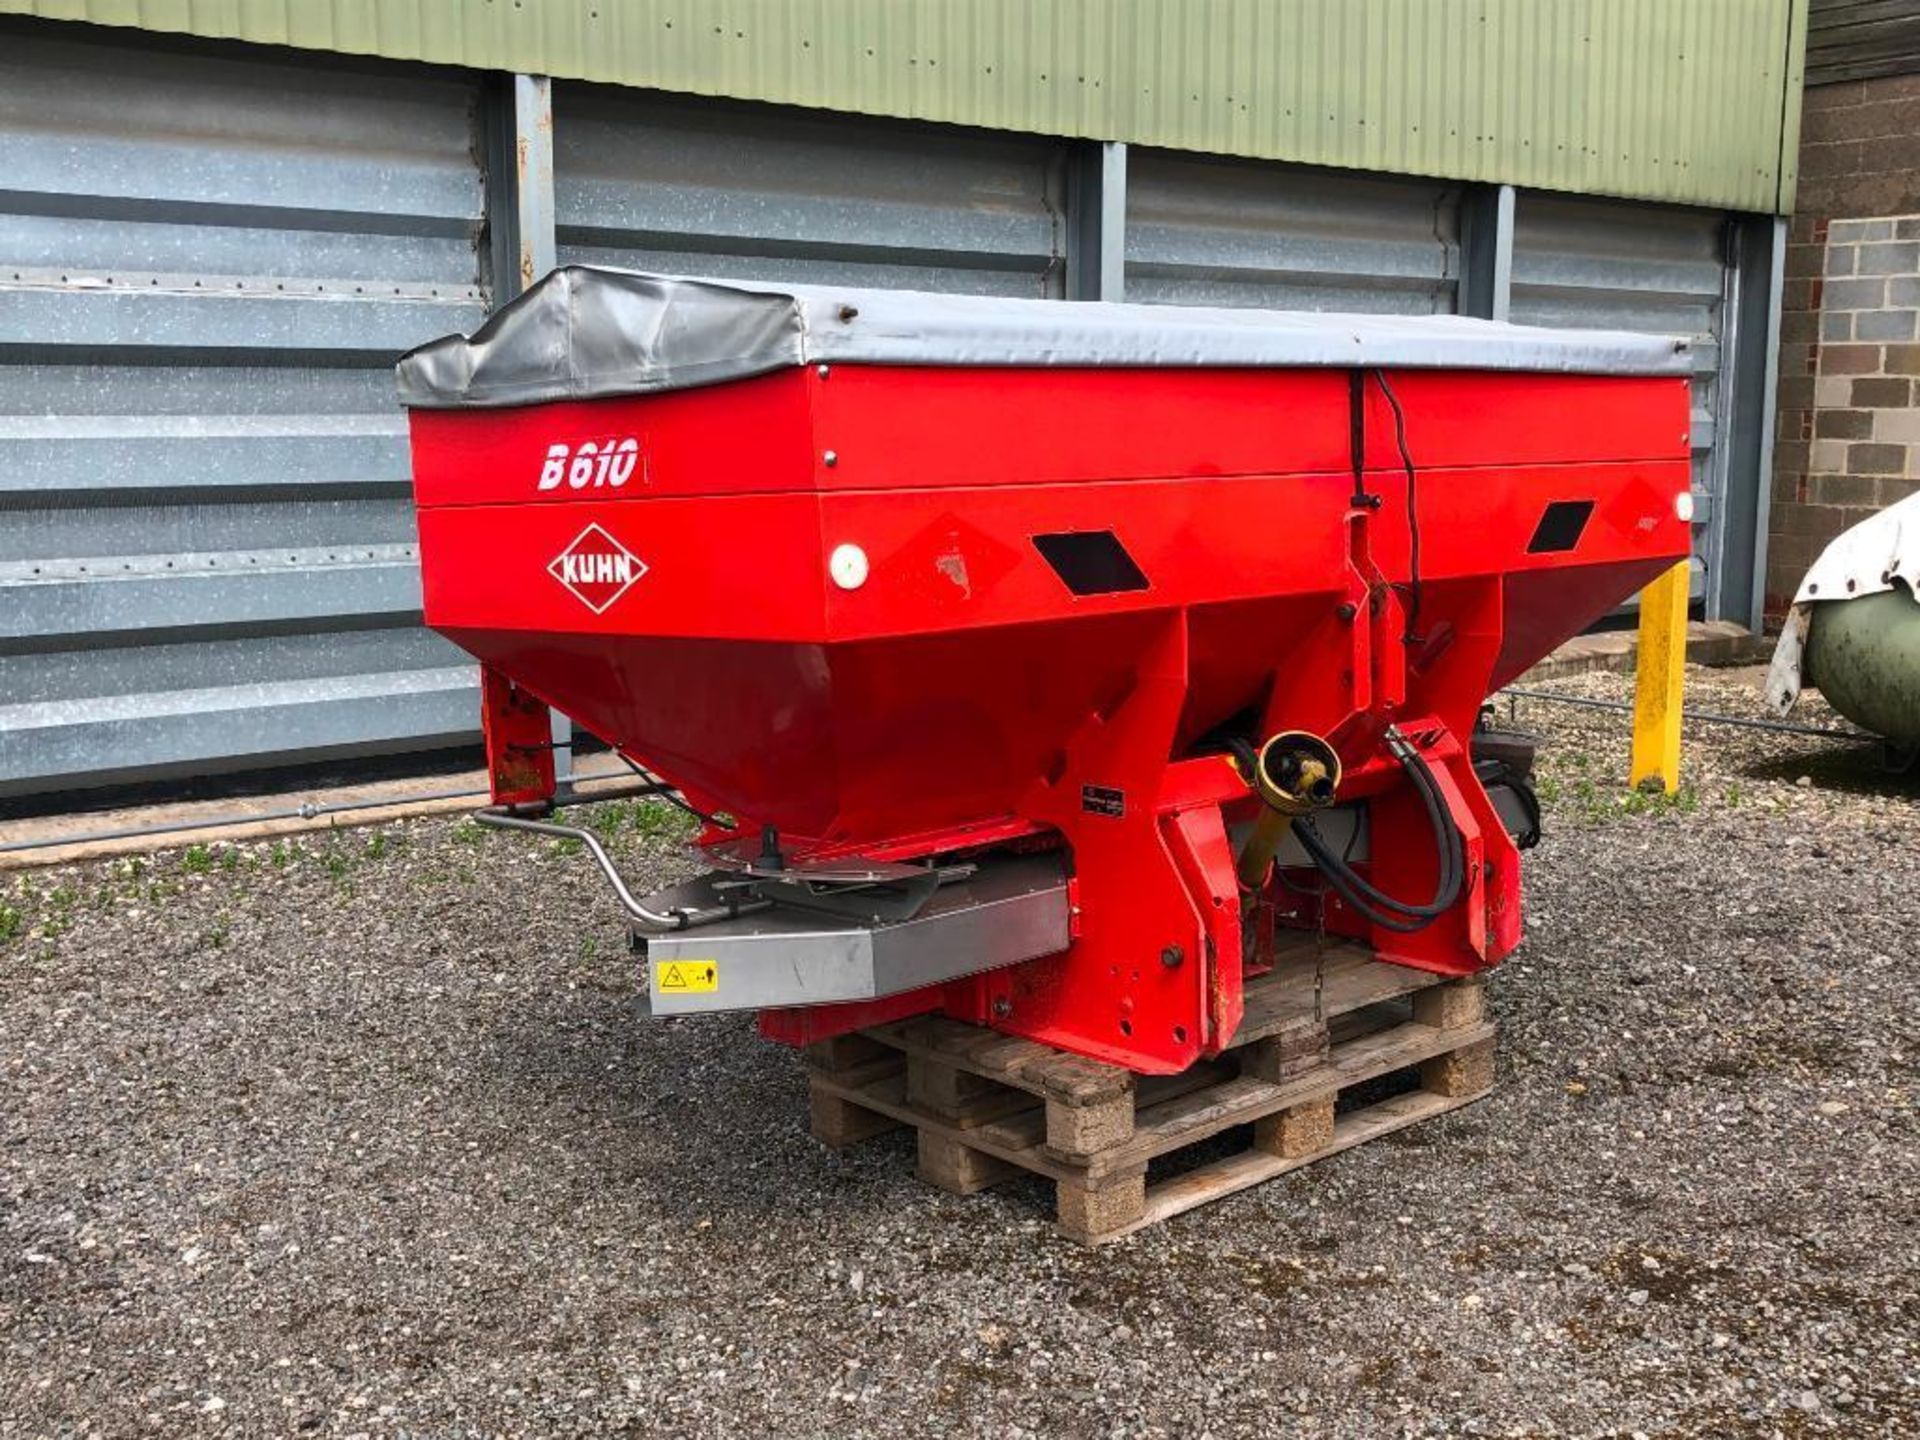 1997 Kuhn MDS 1141 20m twin disc fertiliser spreader with B610 hopper extension, comes with addition - Image 10 of 12